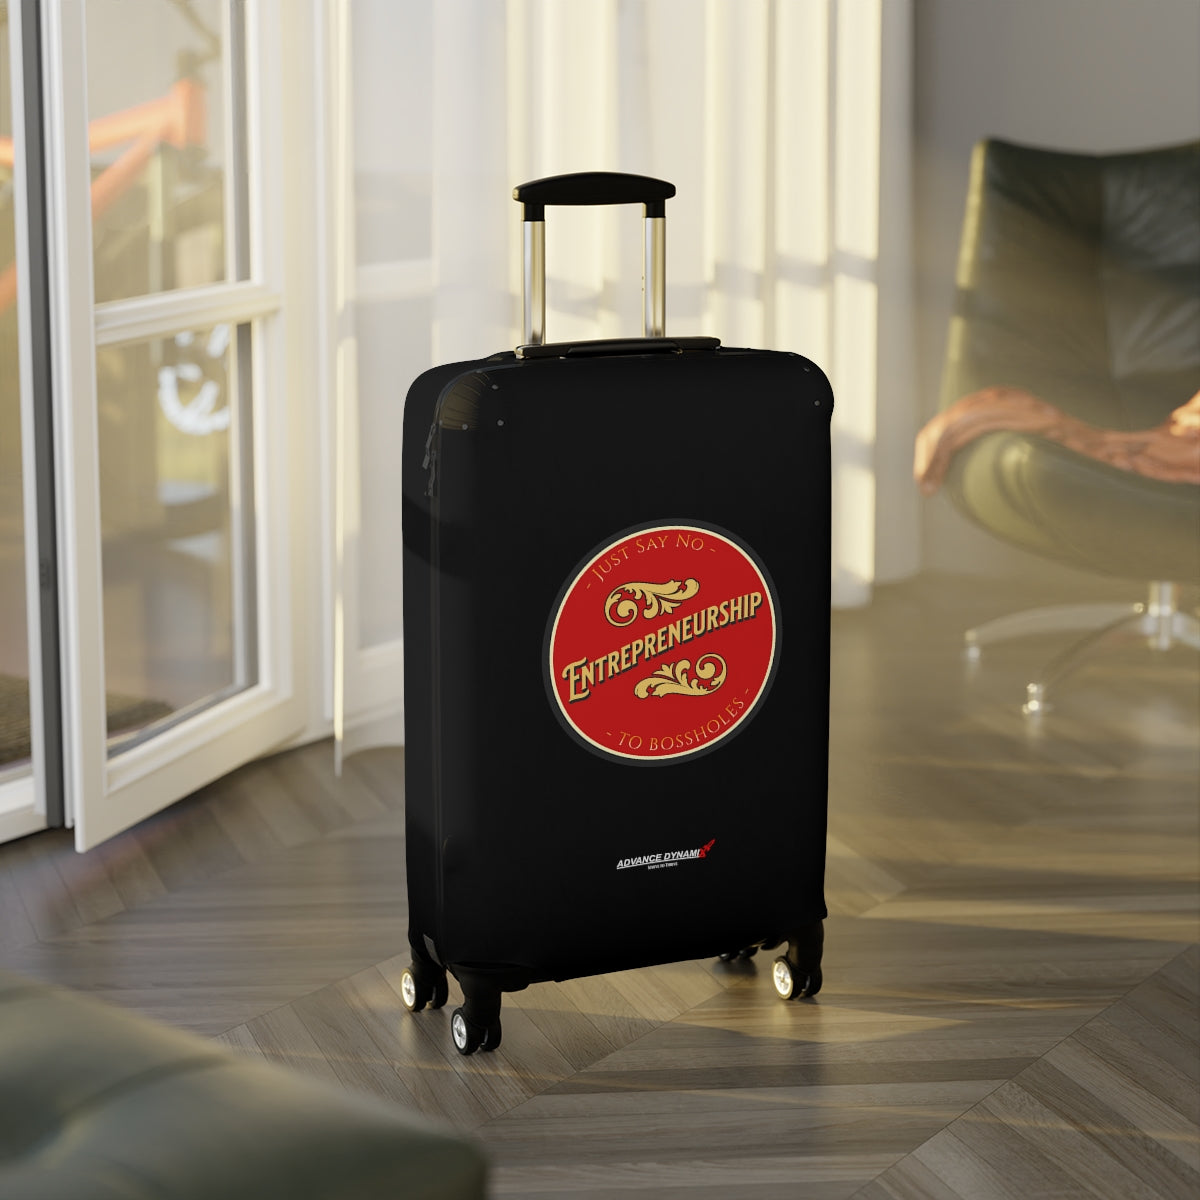 Entrepreneurship - Just say not to bossholes - Luggage Covers Infused with Advance Dynamix Add-A-Tude - Tell the world!